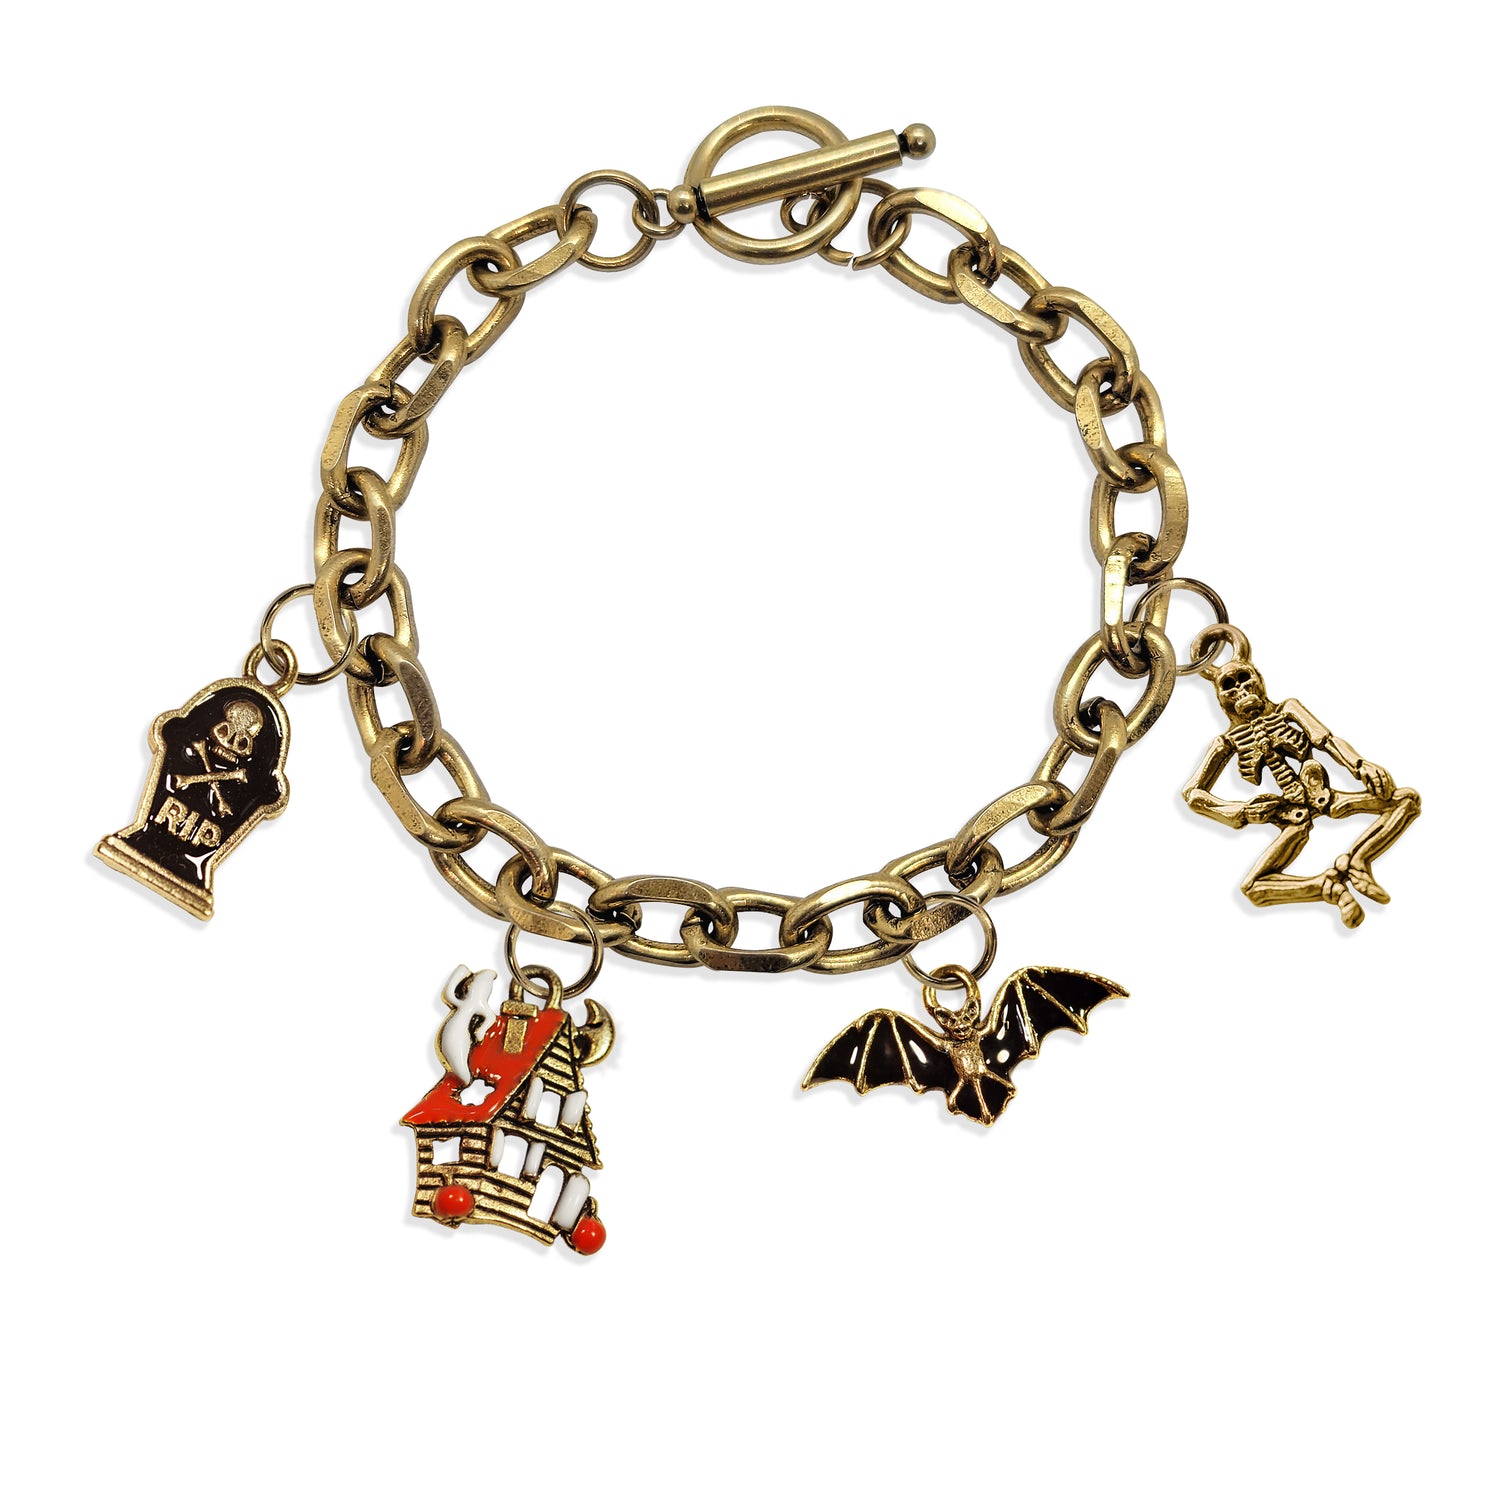 Whimsical Gifts | Halloween Haunted House Toggle Charm Bracelet | 4 Handpainted Charms | Antique Gold or Antique Silver Finish in Antique Gold Finish | Holiday & Seasonal Themed | Halloween Jewelry